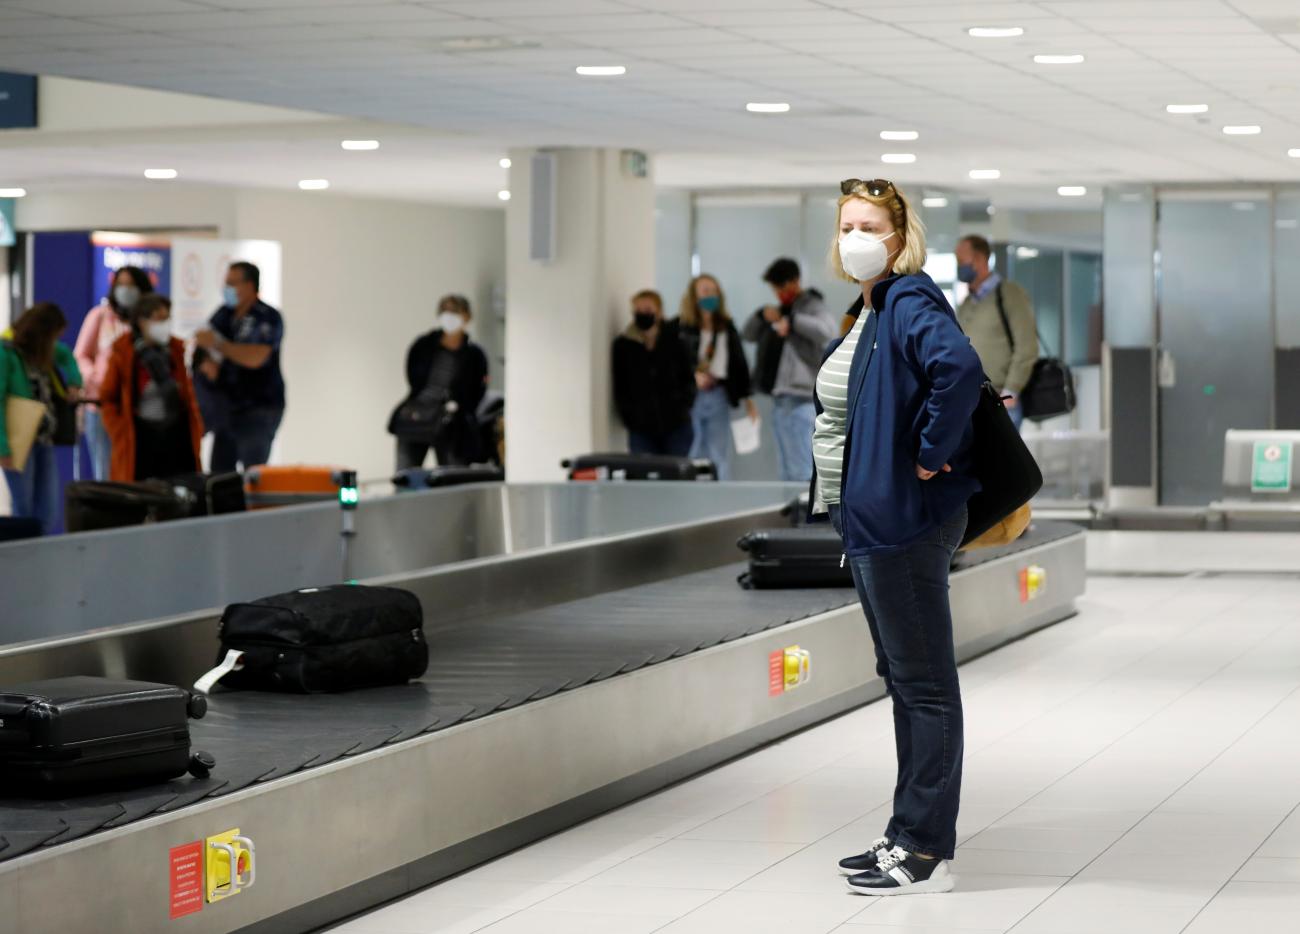 Dutch tourists, who will spend a weeklong holiday in isolation in their tourist resort as part of an experiment, arrive at the Rhodes International Airport, amid the coronavirus disease (COVID-19) outbreak on the island of Rhodes, Greece April 12, 2021.